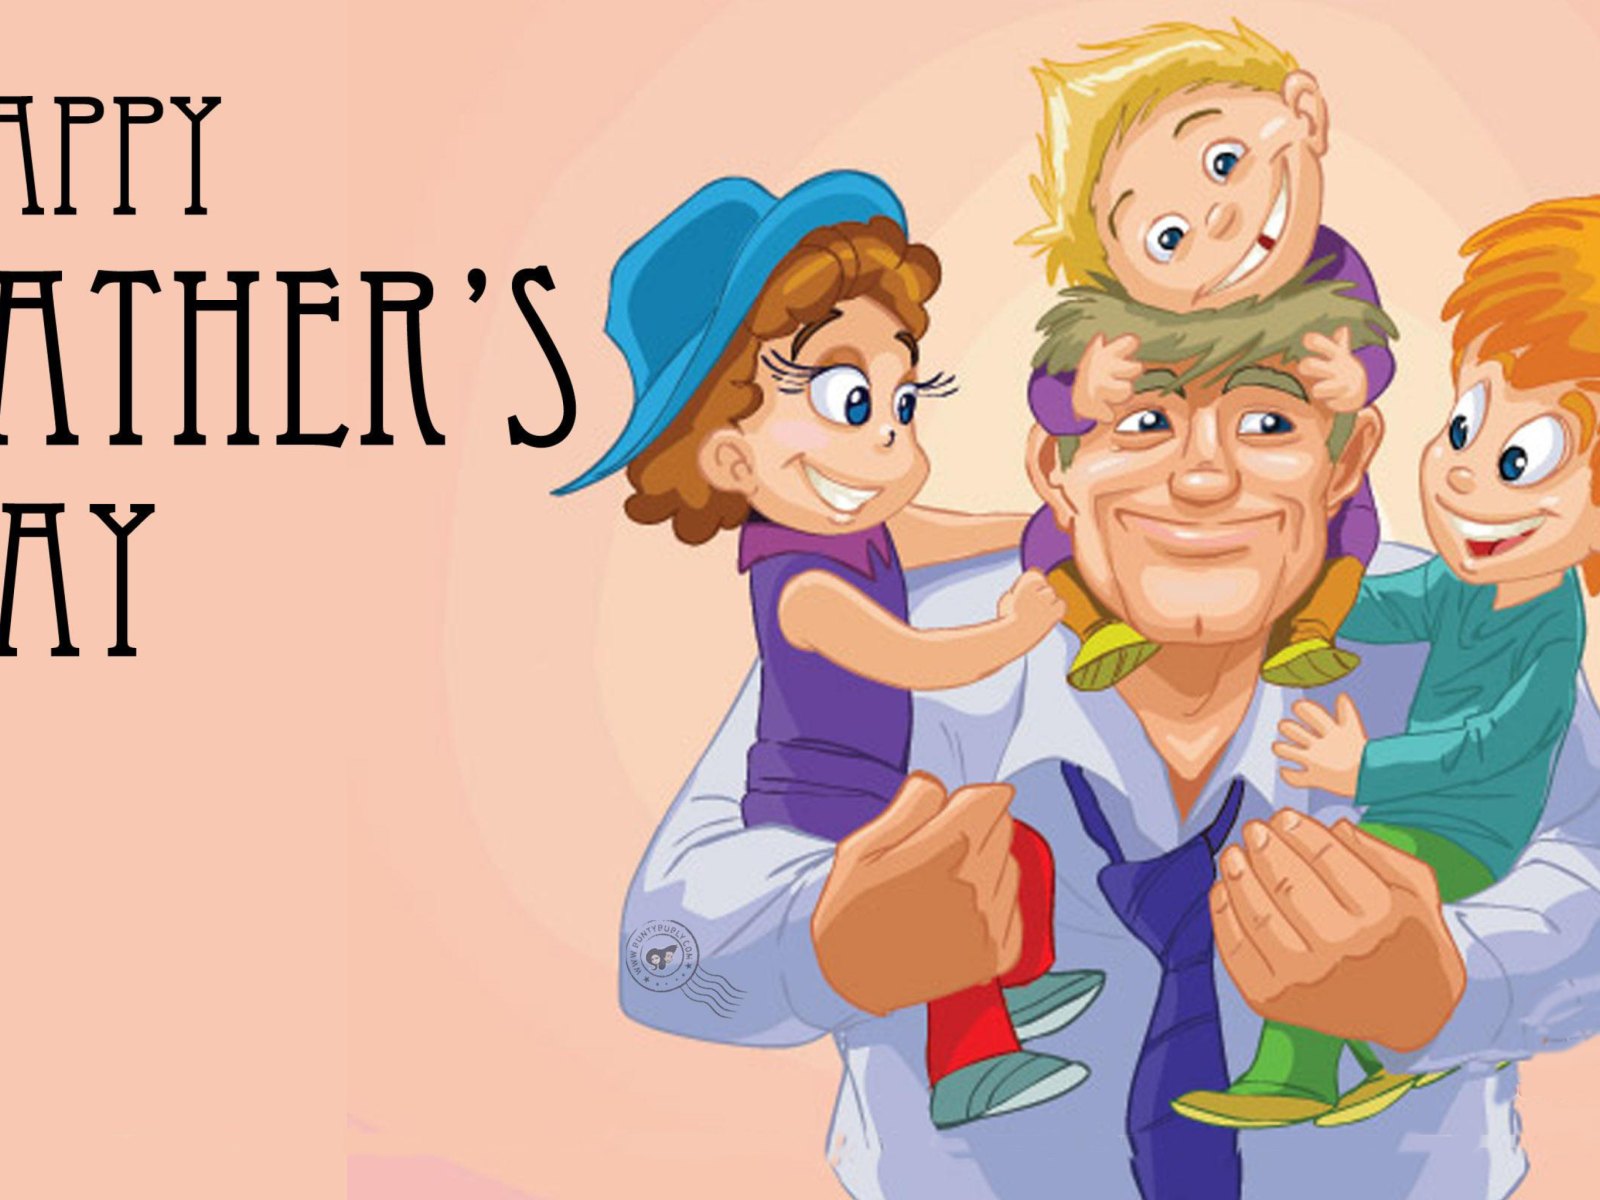 Happy Father's Day (June 3rd Sunday) wallpaper 1600x1200